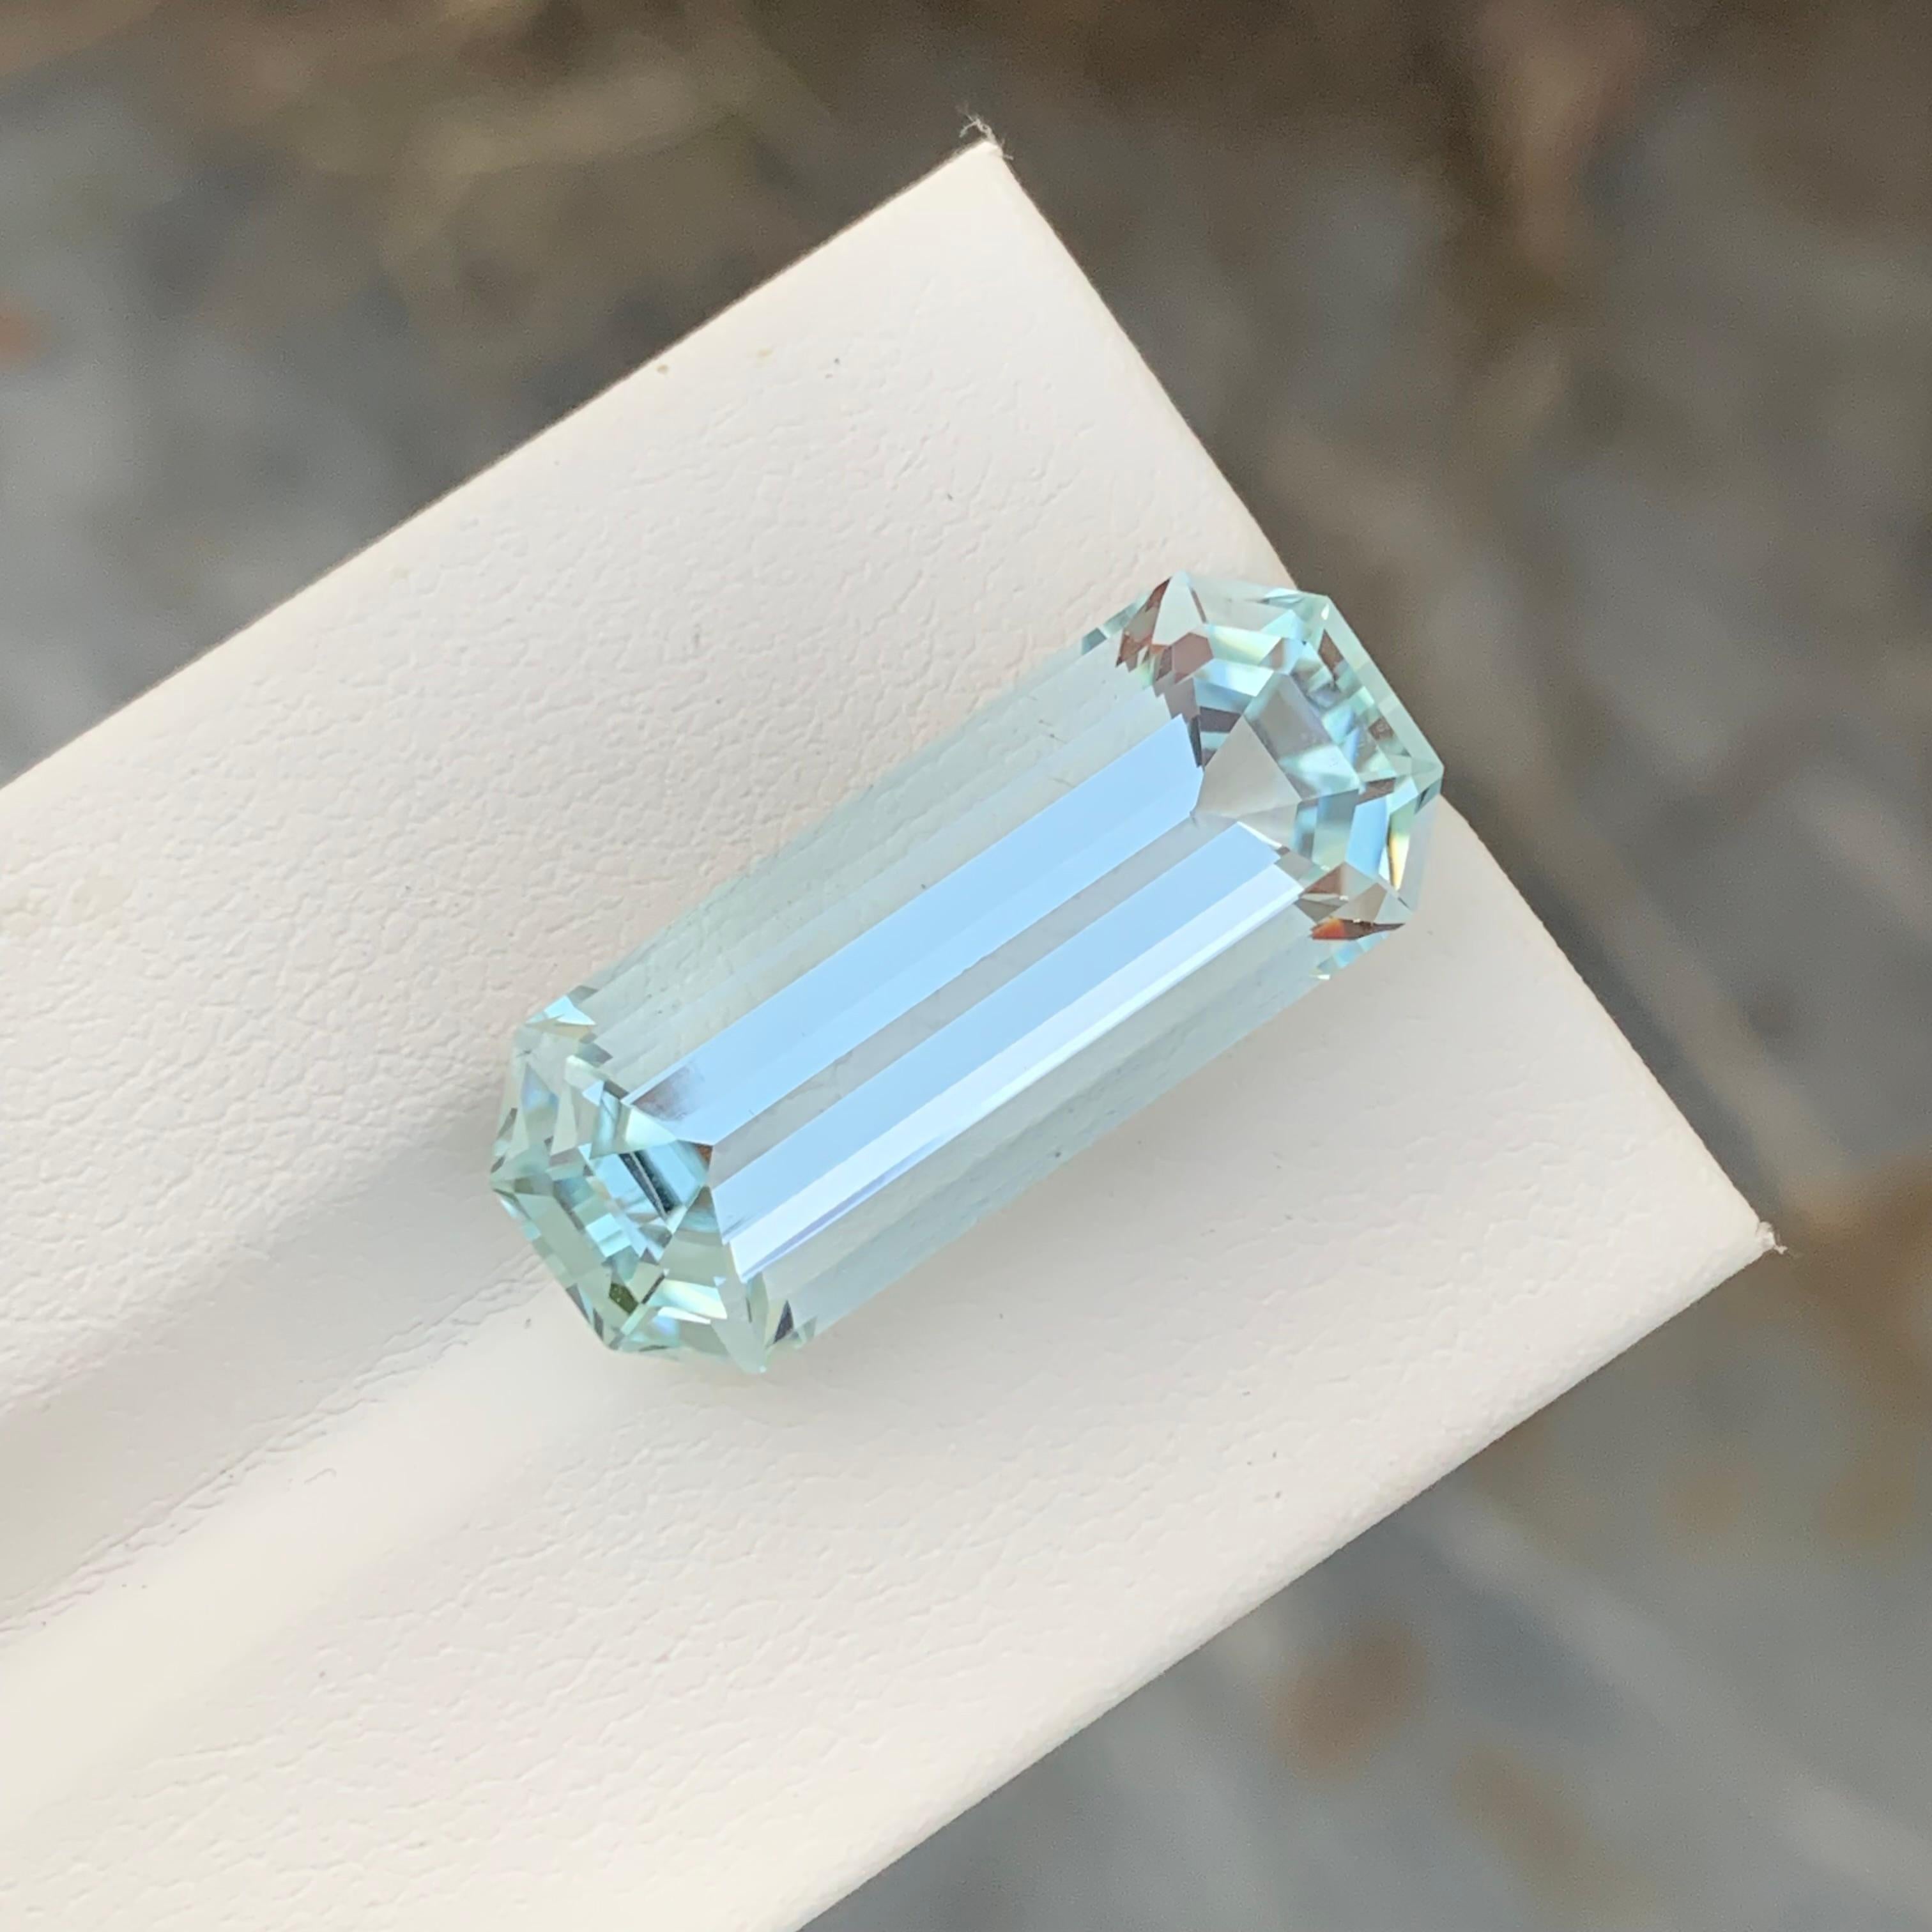 Loose Aquamarine
Weight: 15.30 Carat
Dimension: 24 x 10 x 8.2 Mm
Colour : Pale Blue
Origin: Shigar Valley, Pakistan
Treatment: Non
Certificate : On Demand
Shape: Emerald

Aquamarine is a captivating gemstone known for its enchanting blue-green hues